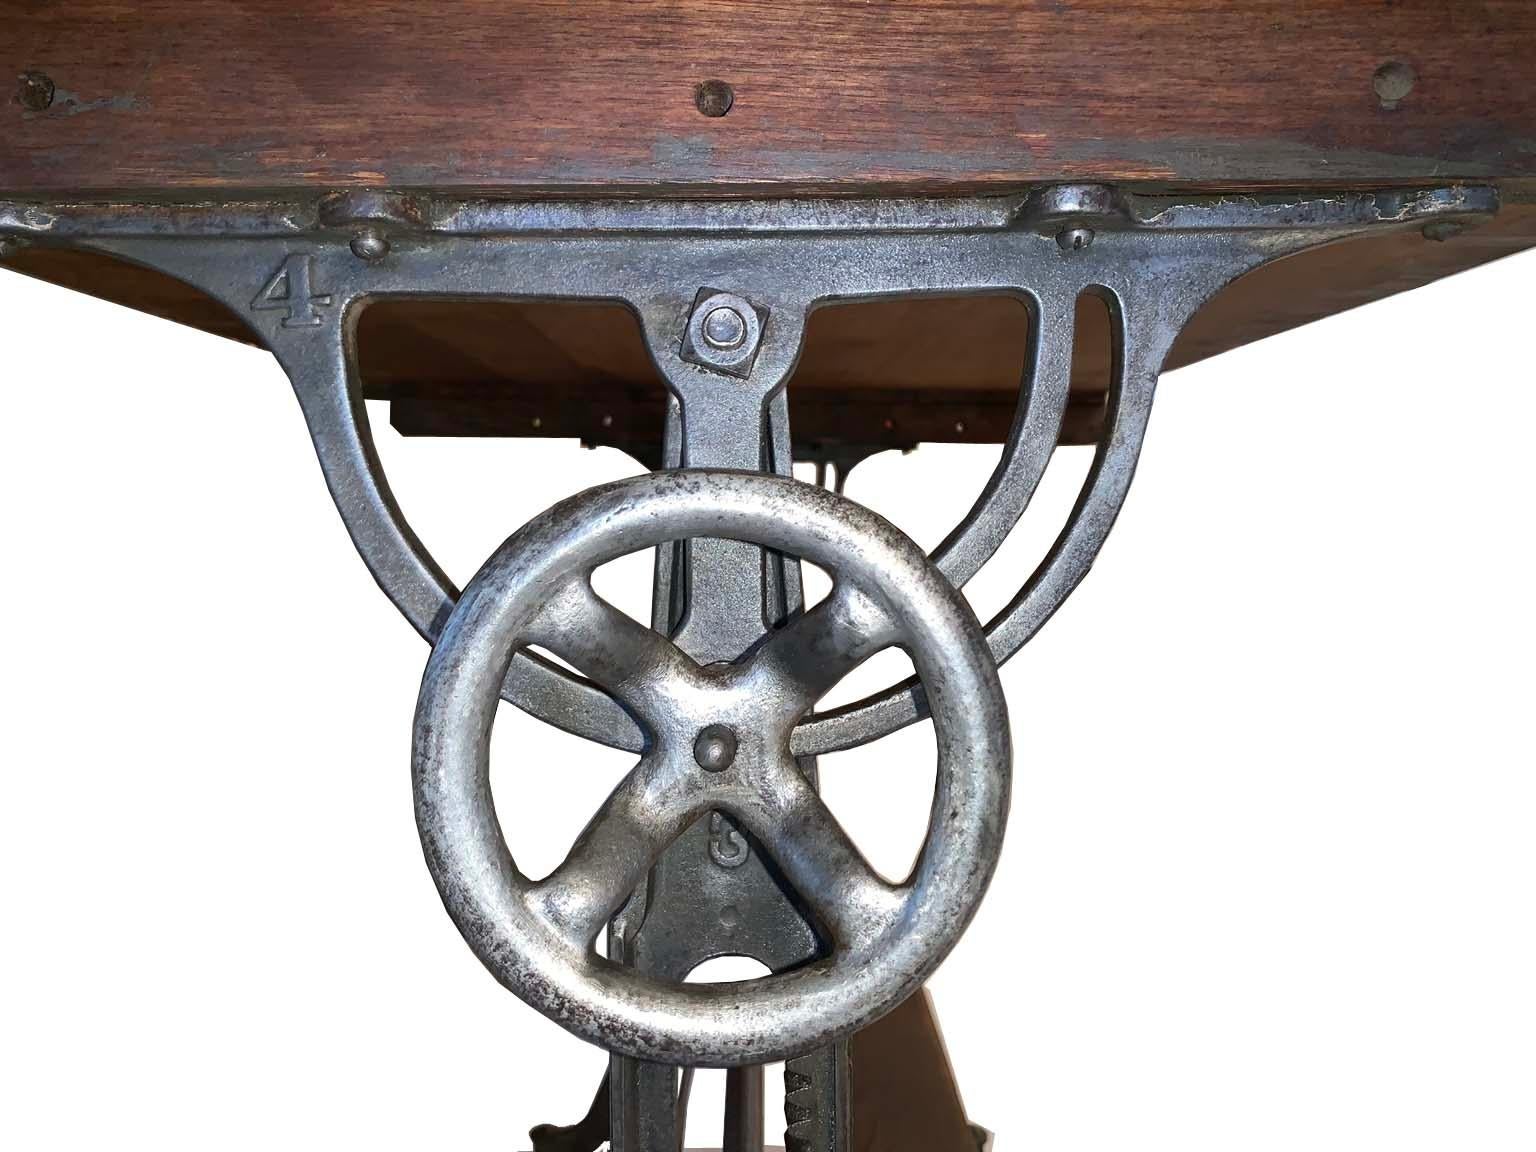 A fantastic find, a large functional drafting table with iron base, this piece is in perfect functional condition. The adjustable wheels are smooth. The base is tight and stabile. This is an ideal piece for standing desk or an adjustable island.